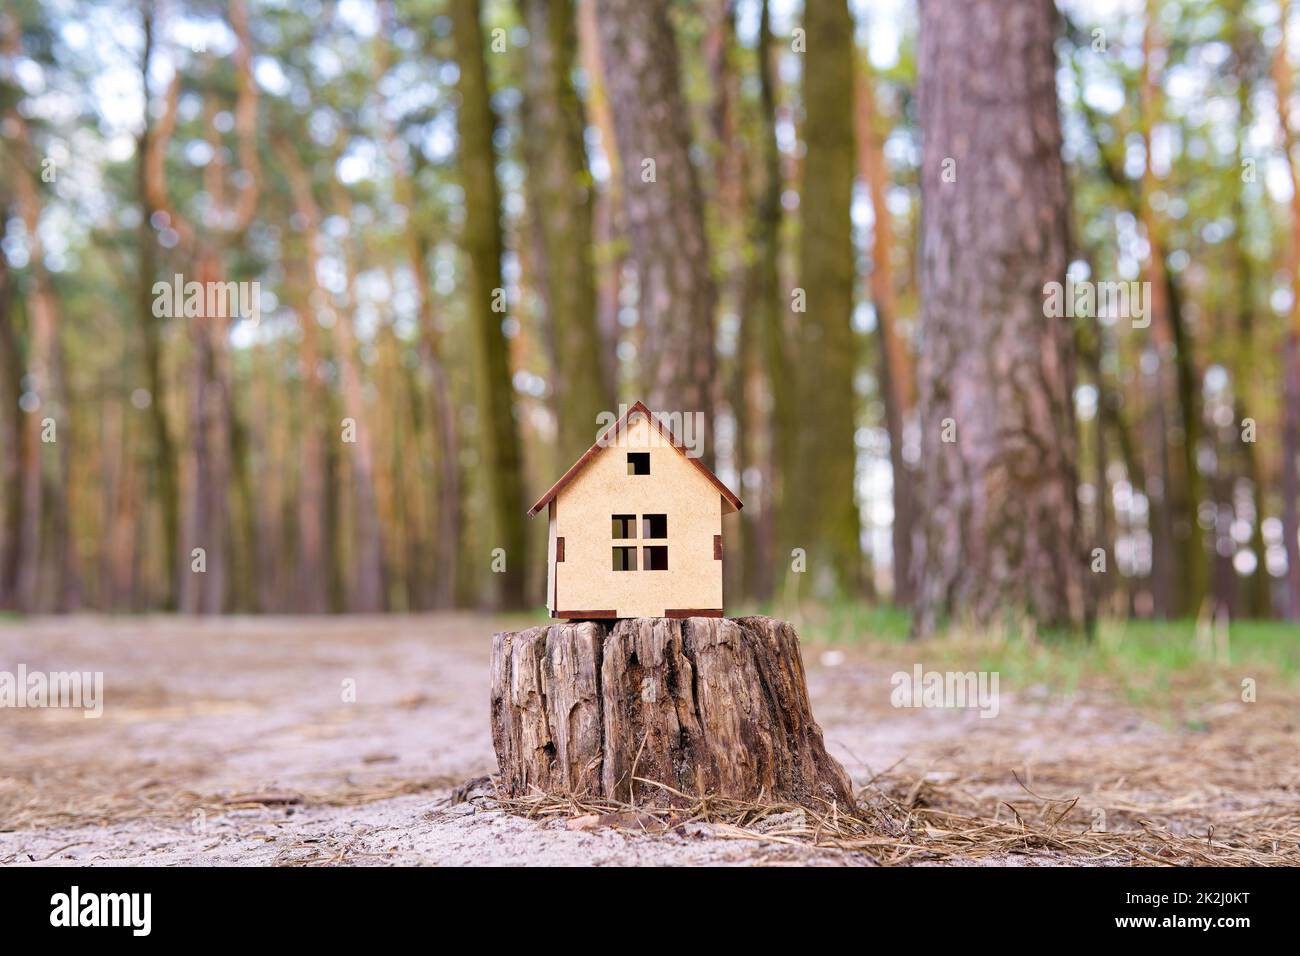 Small wooden toy house model placed on a tree stump in the forest Stock Photo